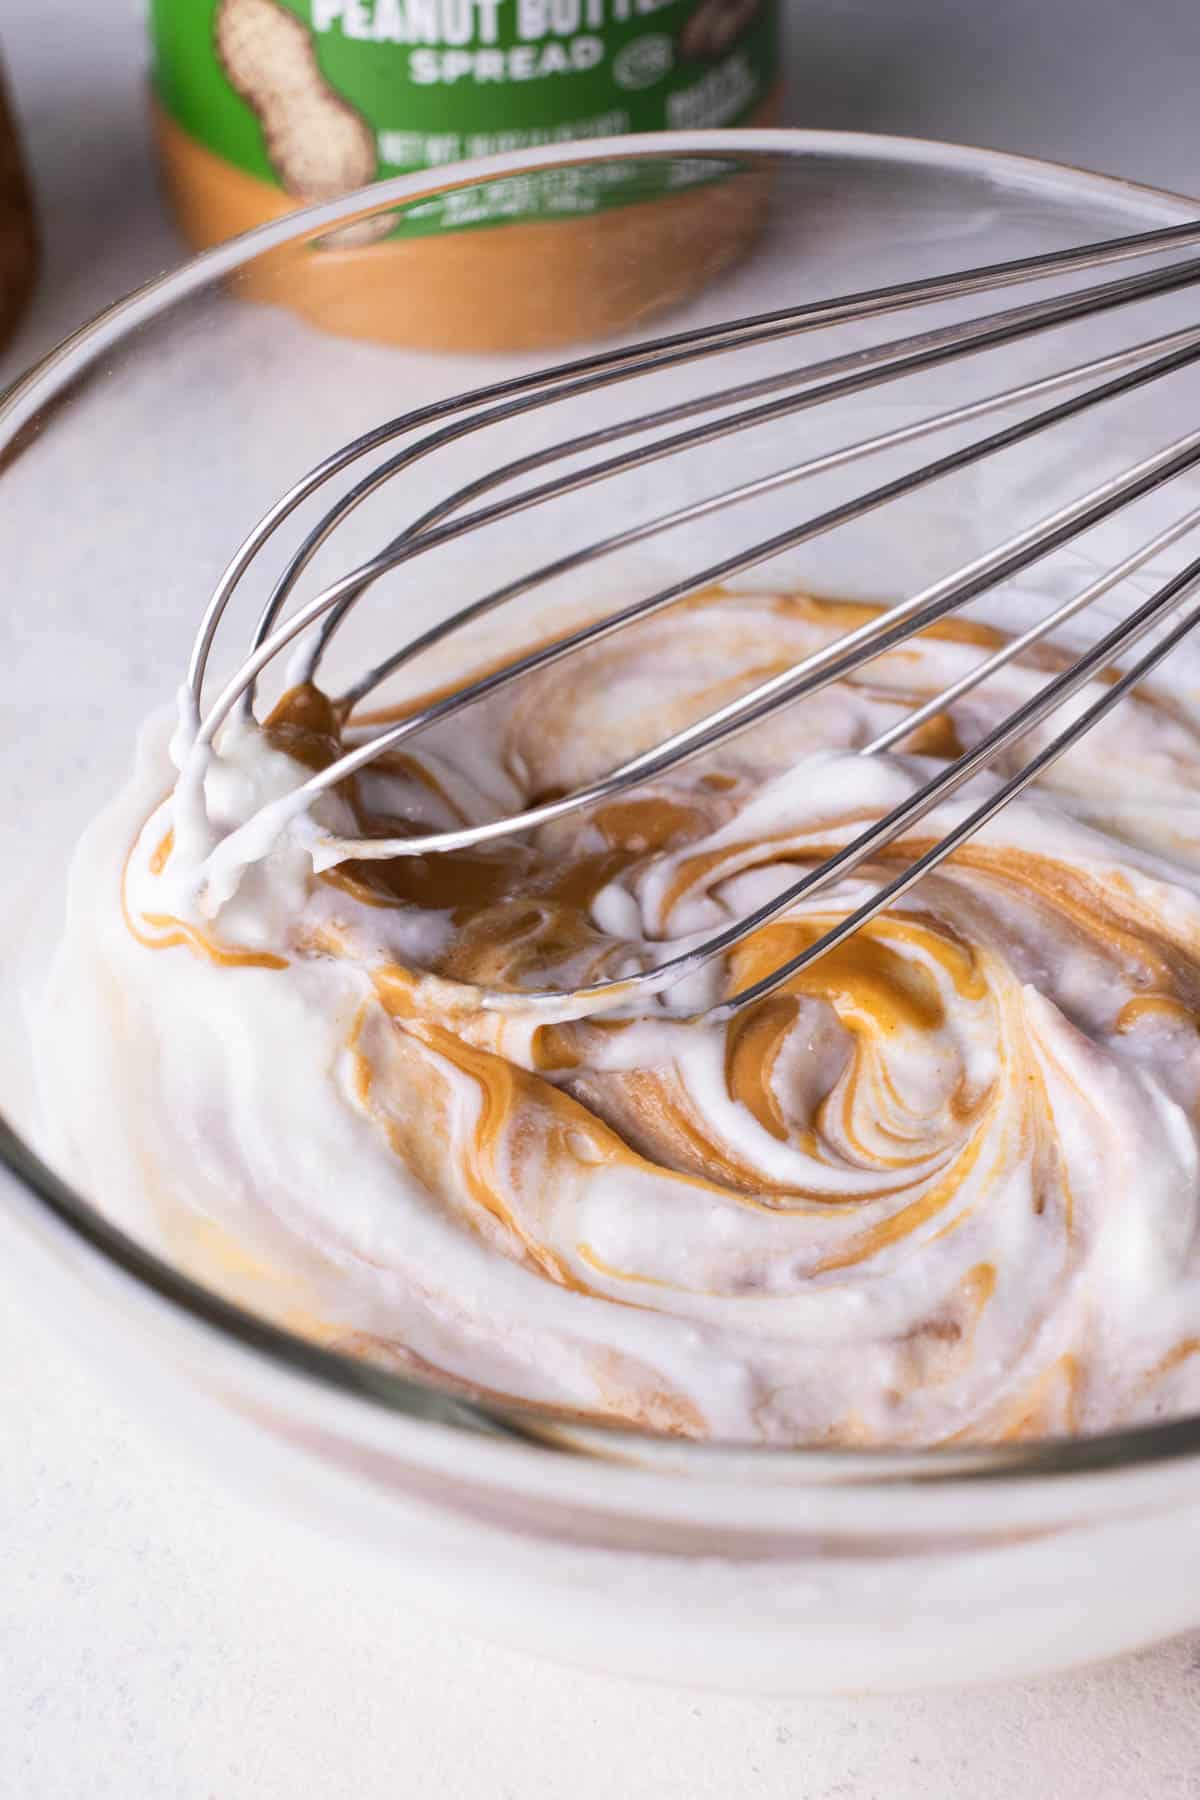 Greek yogurt and peanut butter are whisked together in a glass bowl.